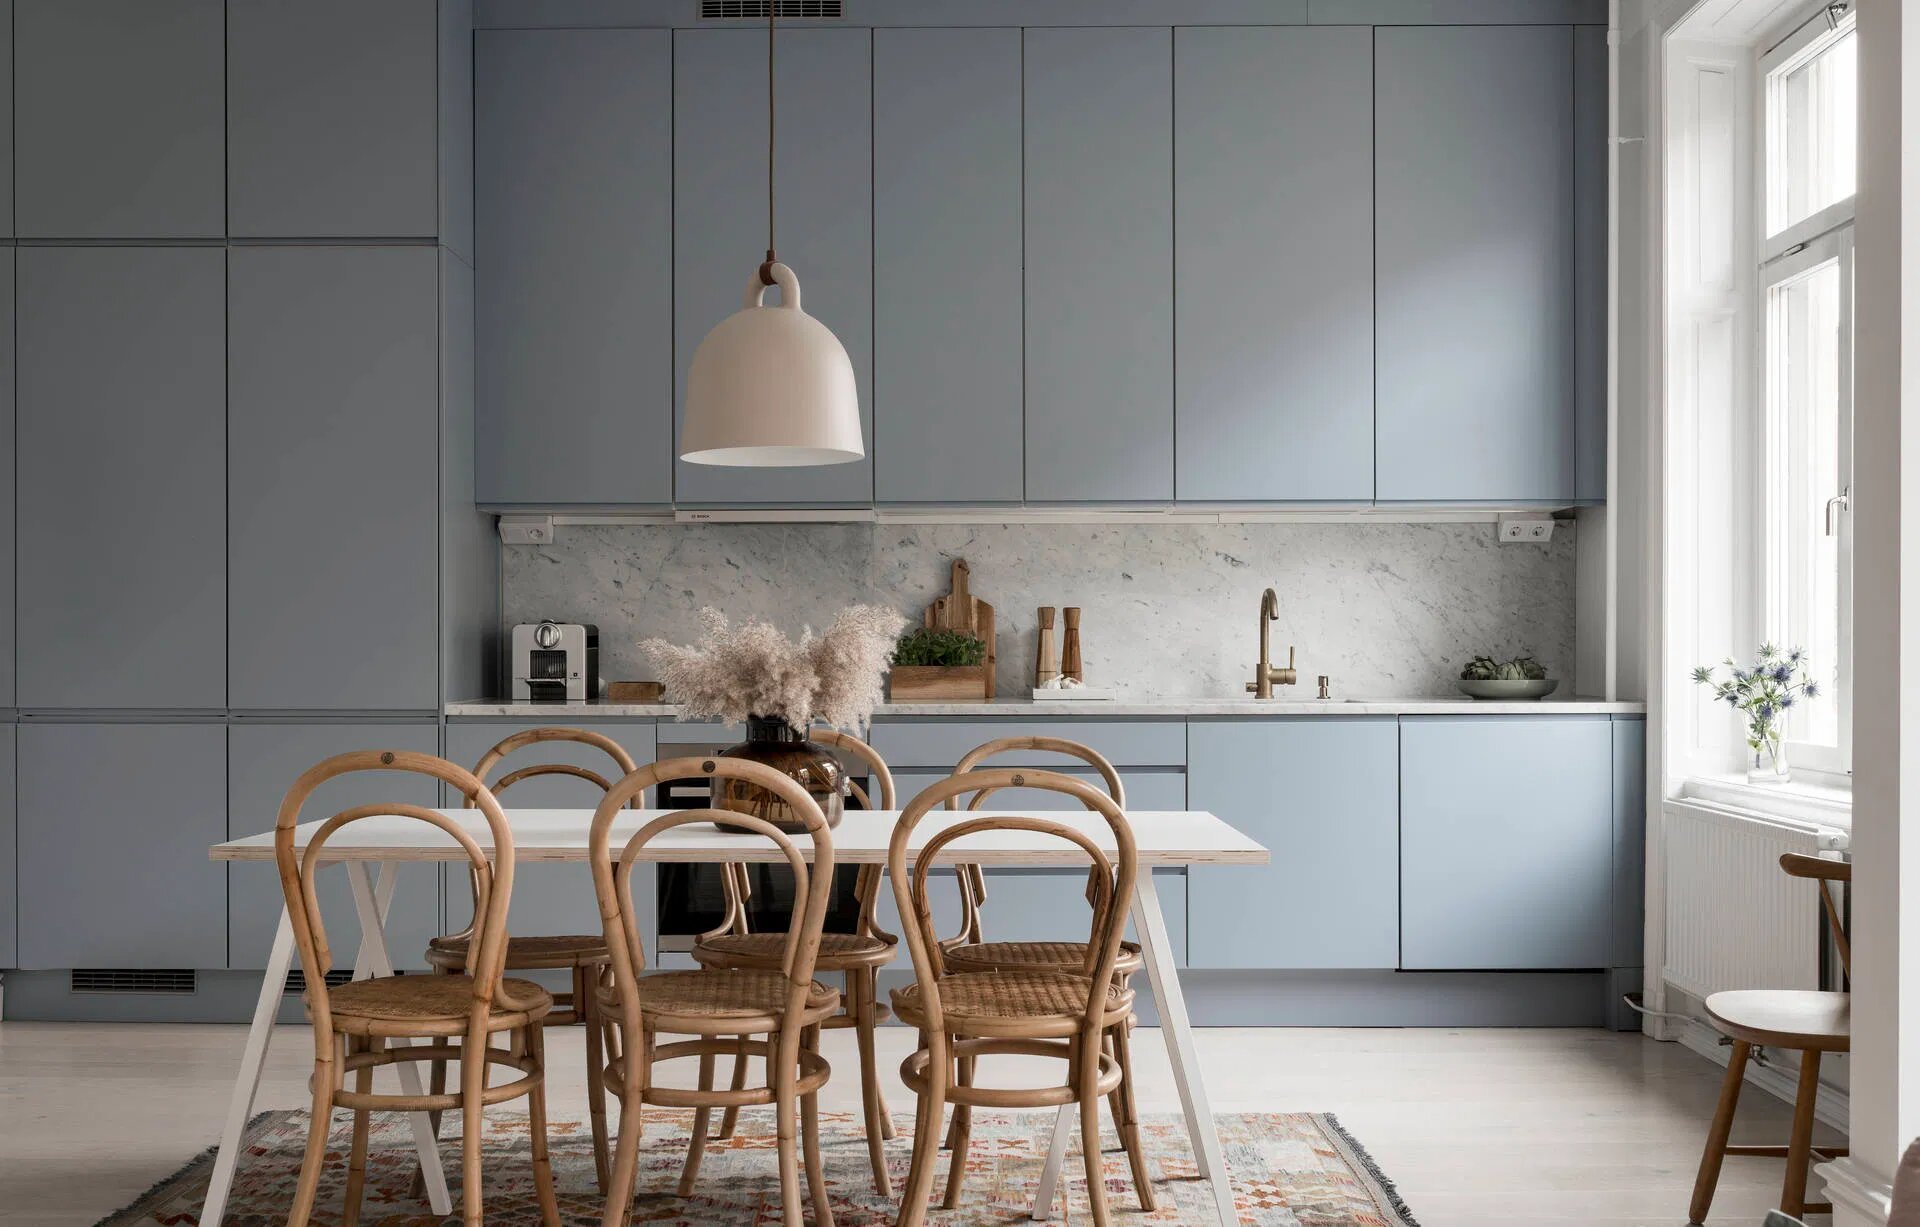 12 Mistakes to Avoid While Reforming Your Kitchen